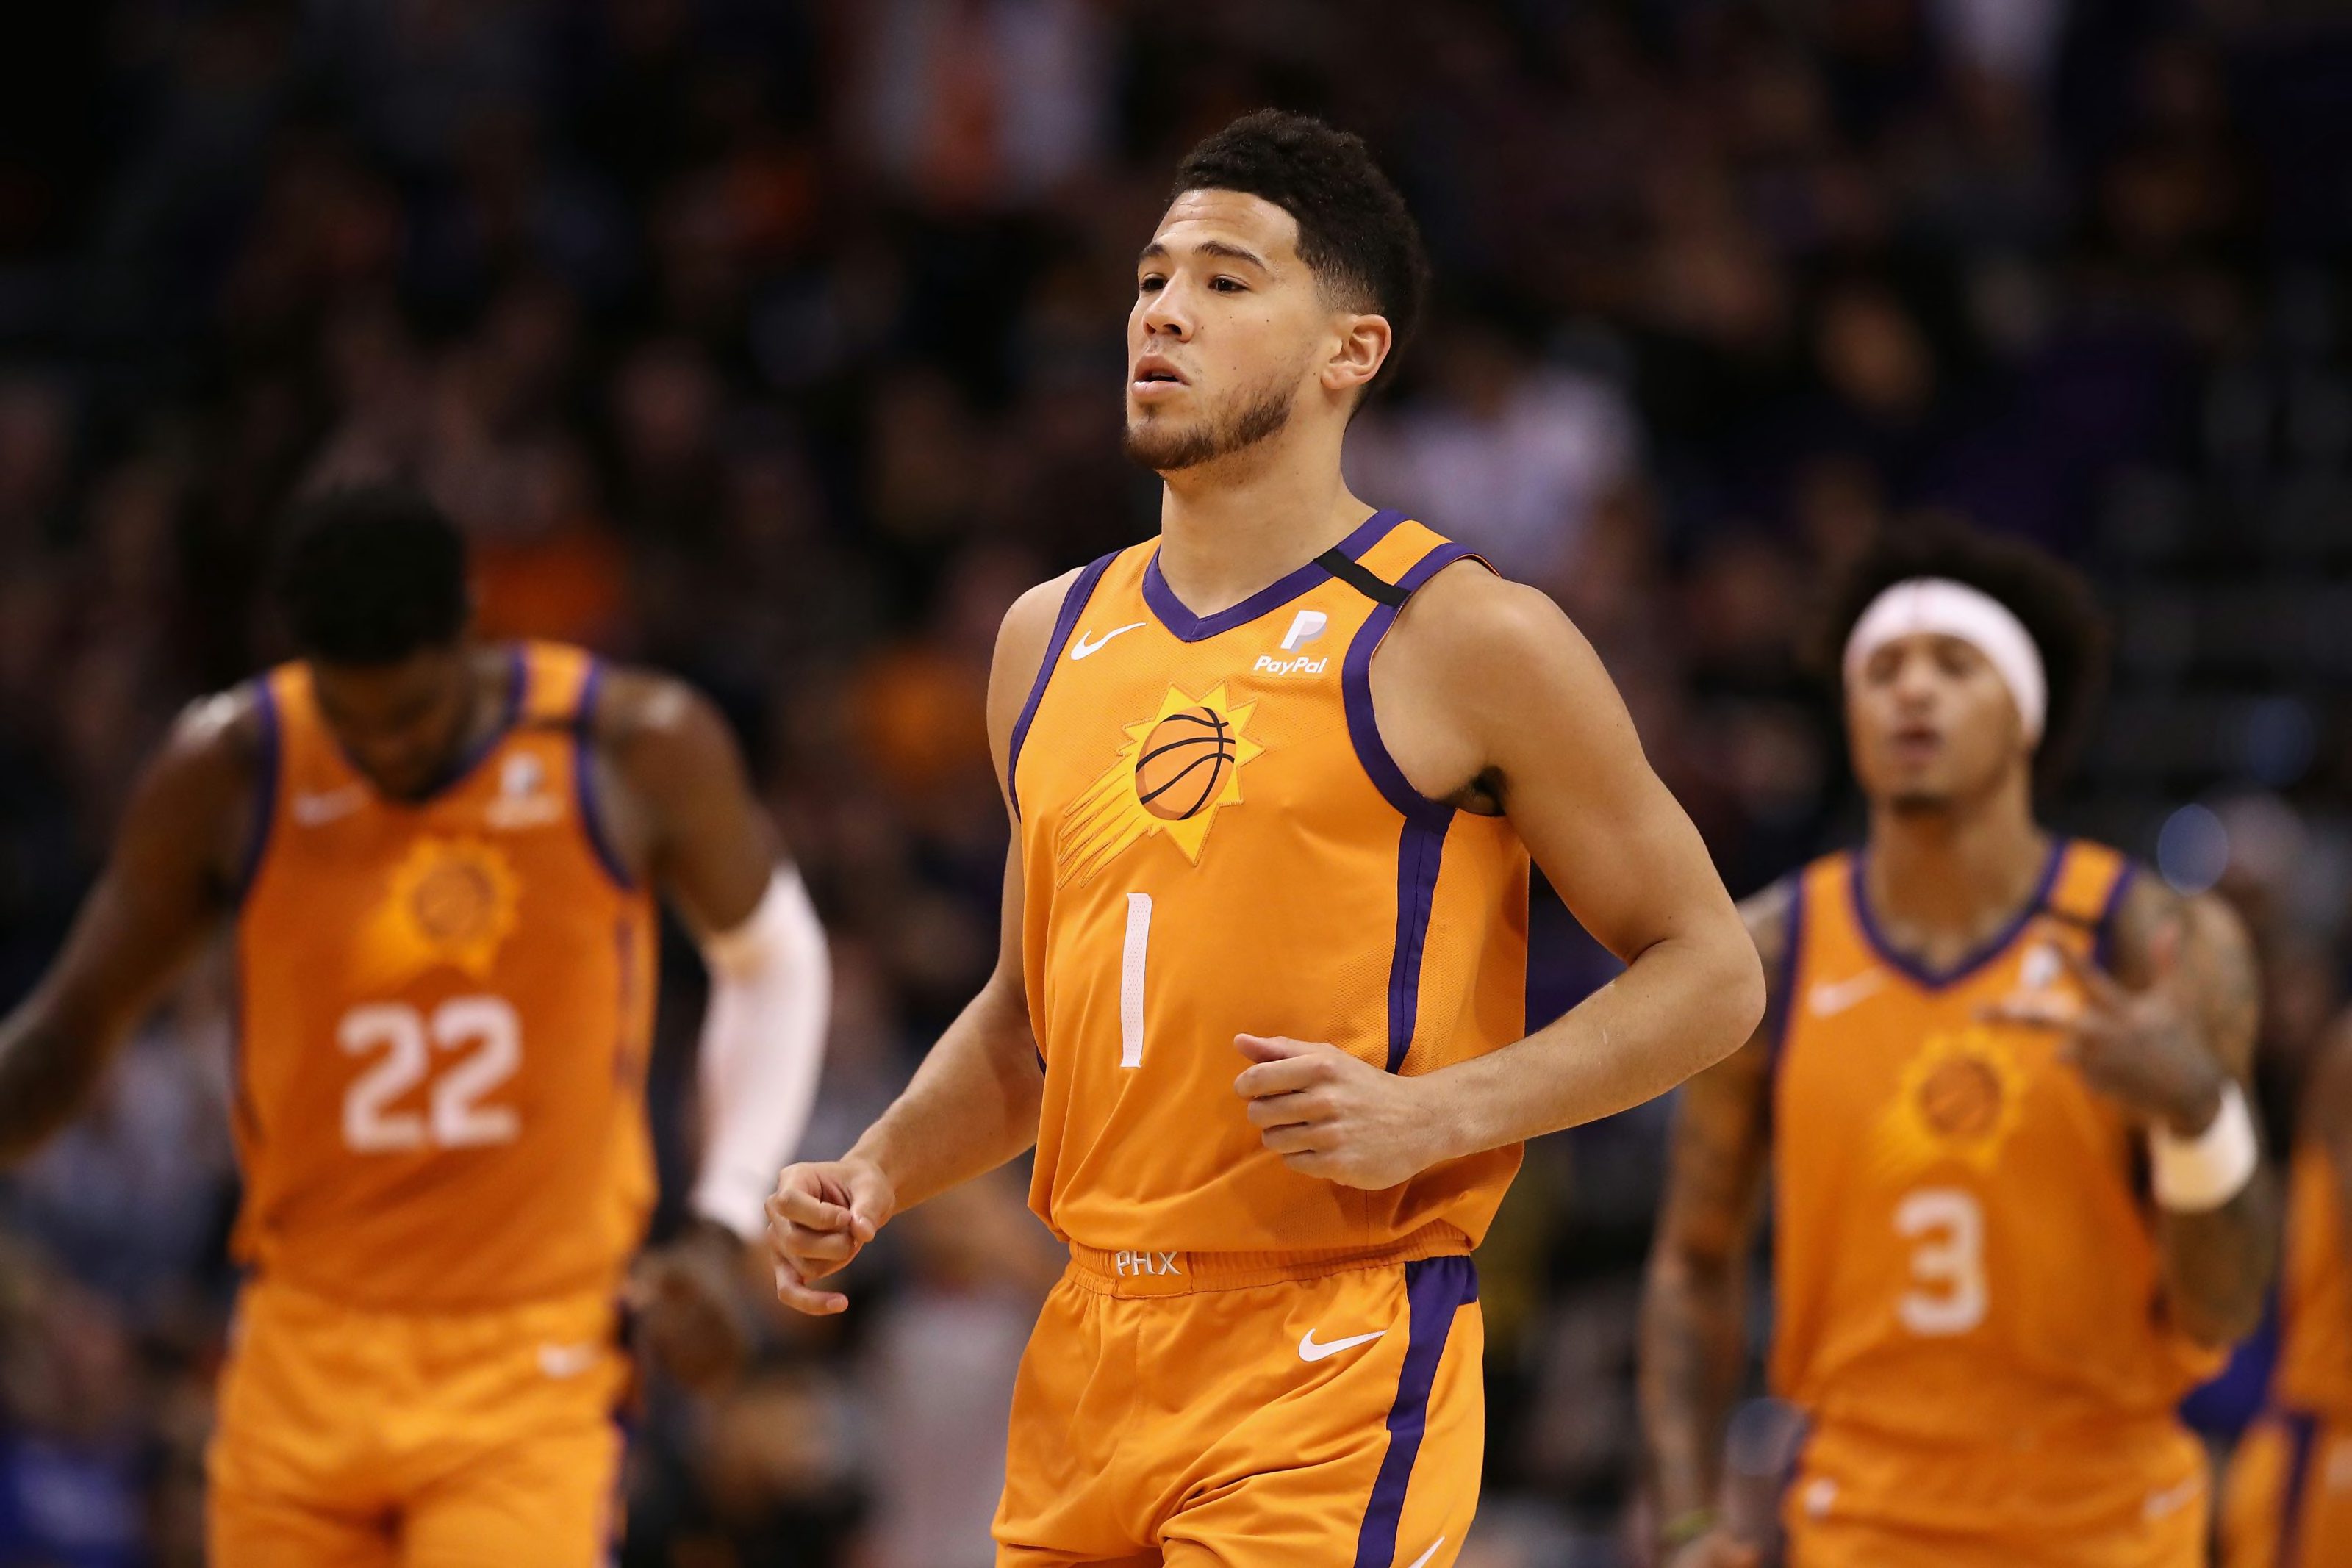 Phoenix Suns: How does Booker compare to the best guards in the NBA?